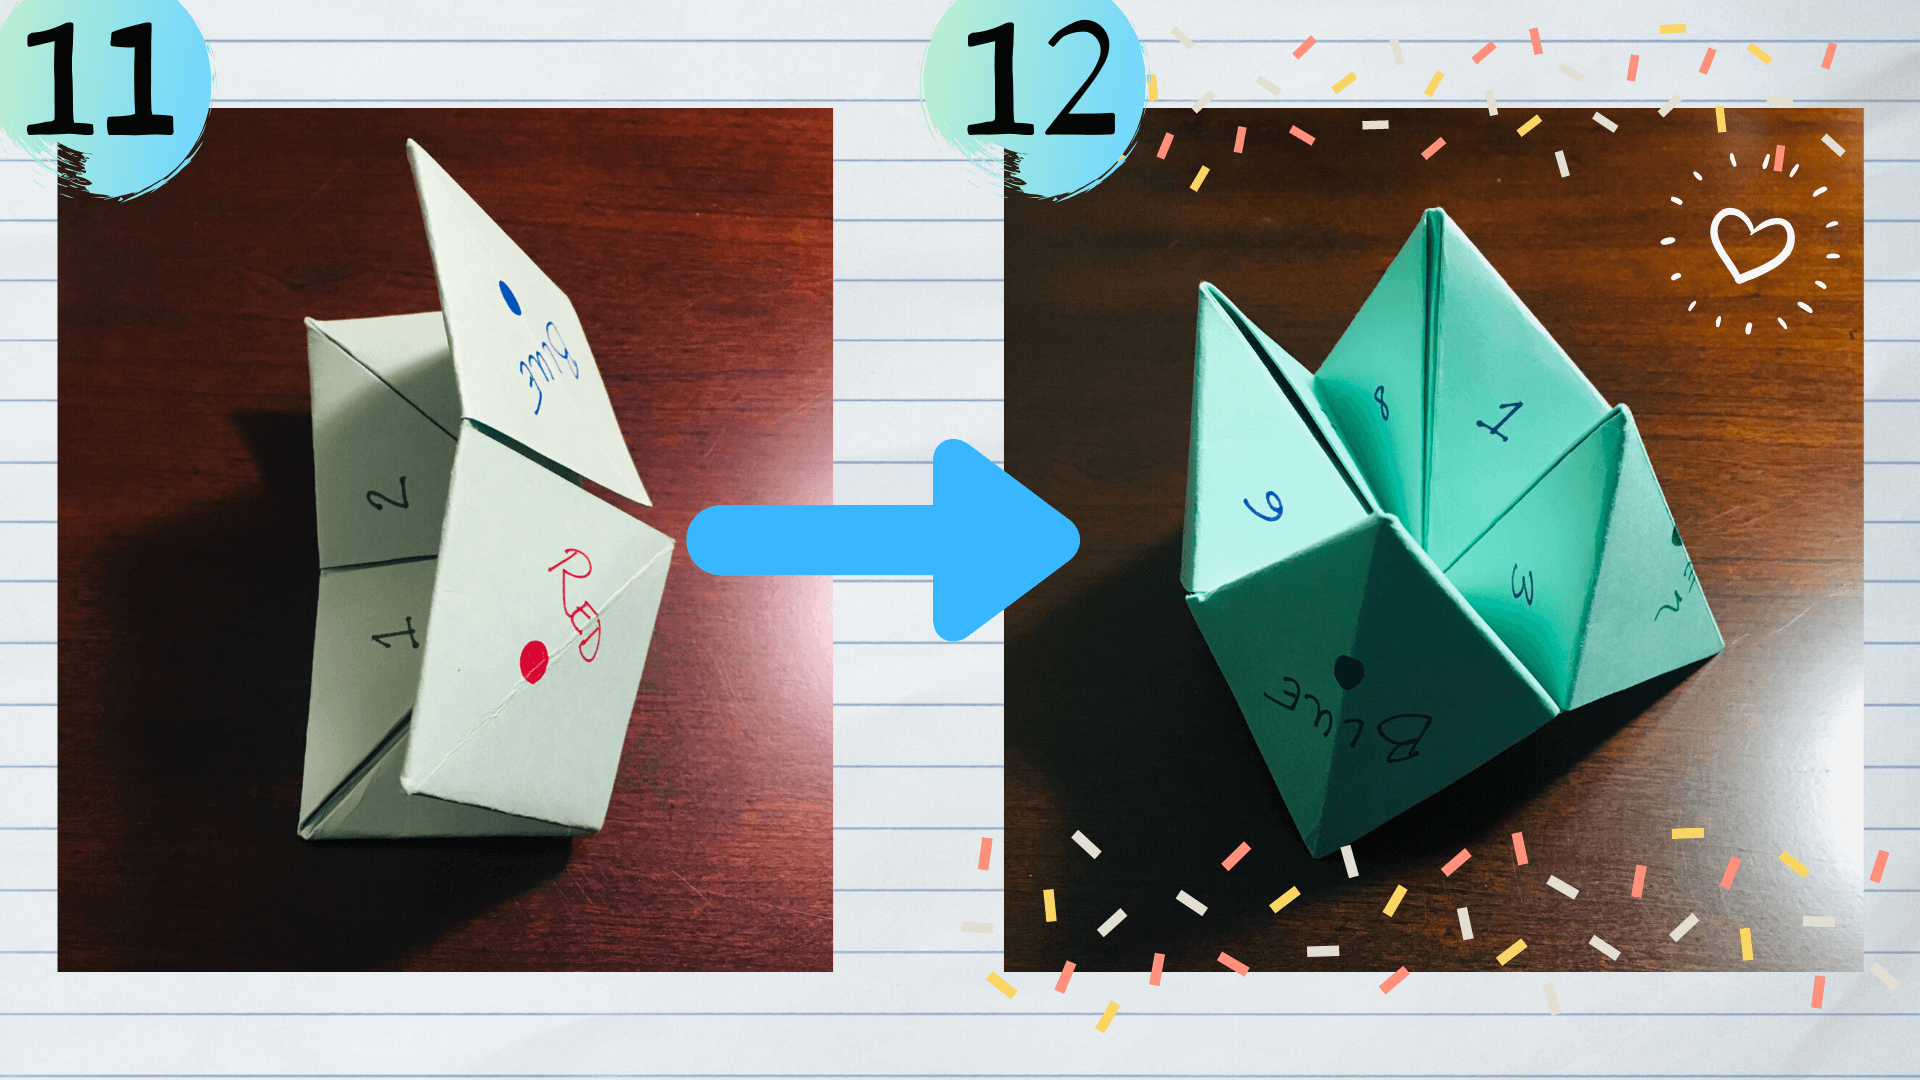 The final steps to making a cootie catcher. 